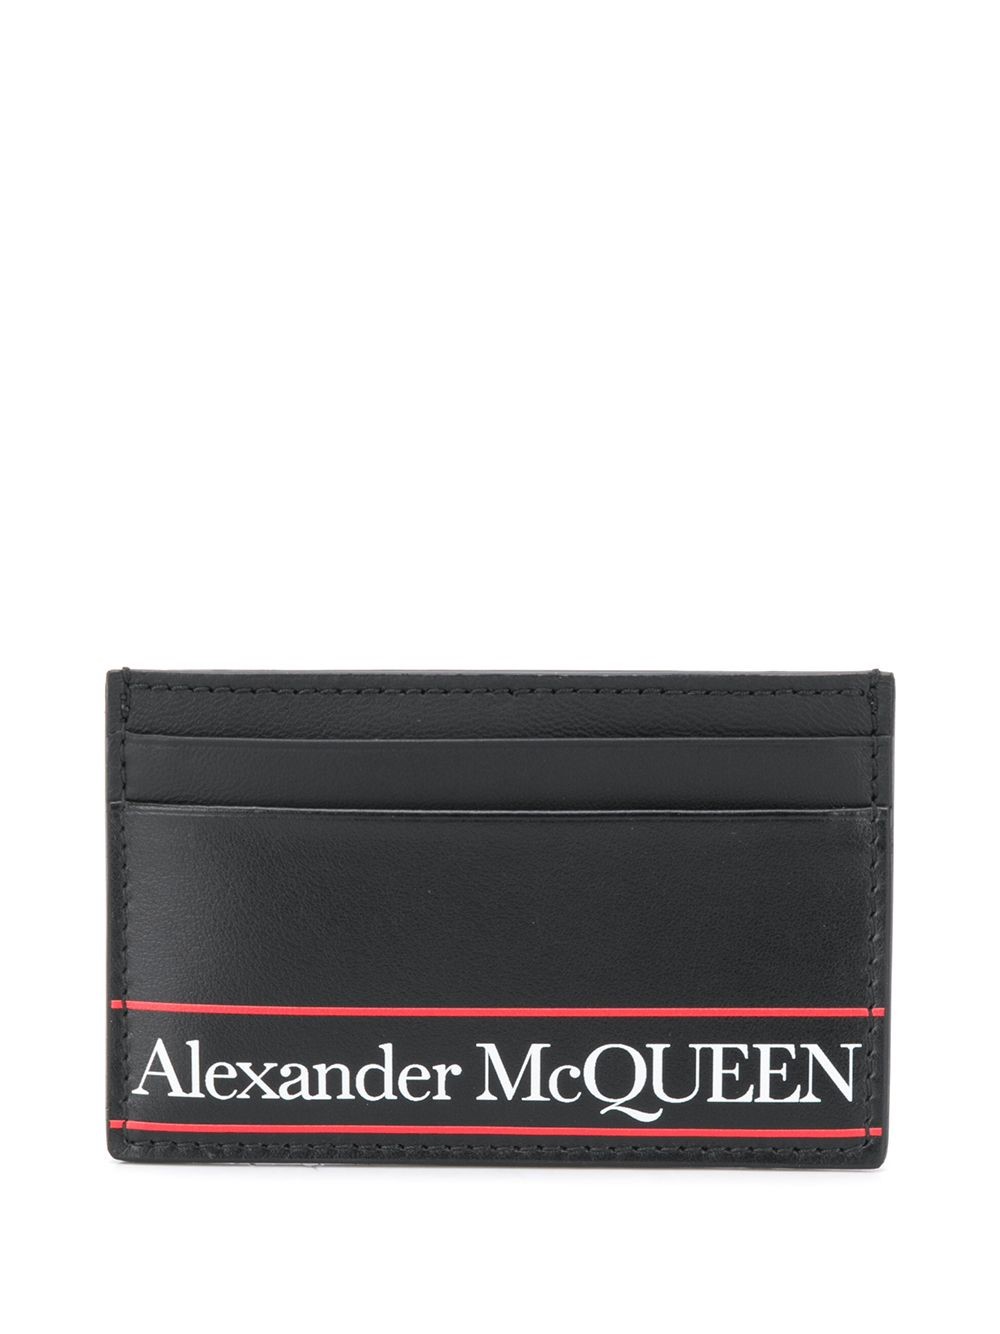 alexander mcqueen CARD HOLDER available on montiboutique.com - 35022